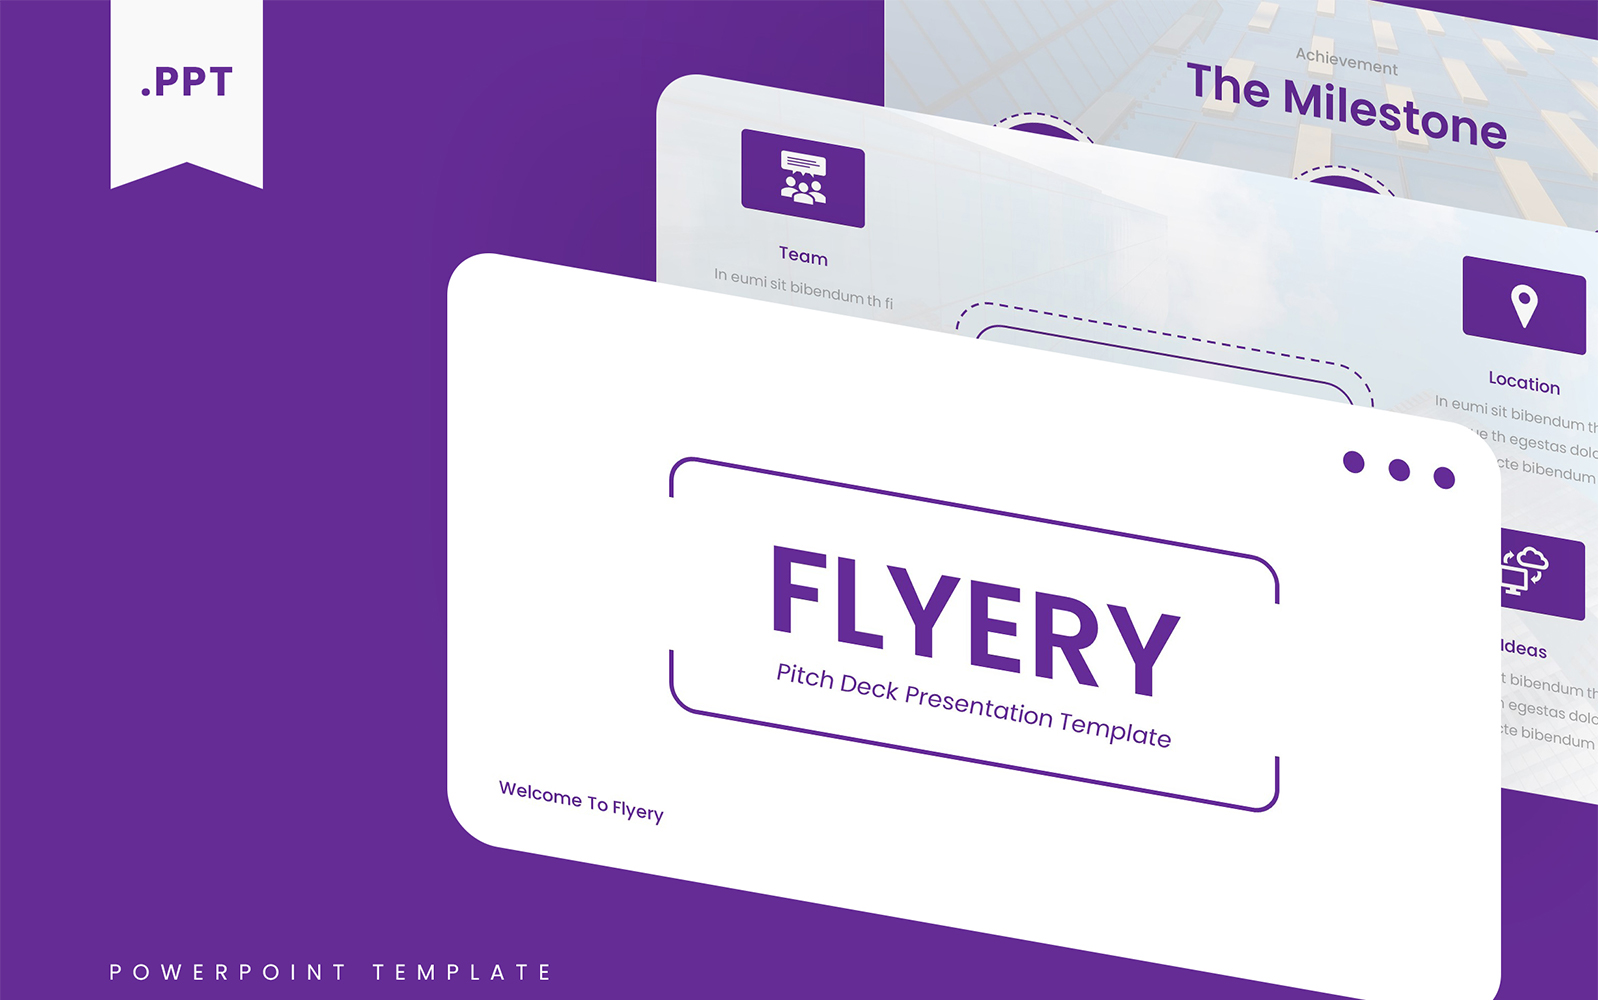 Flyery – Pitch Deck PowerPoint Template